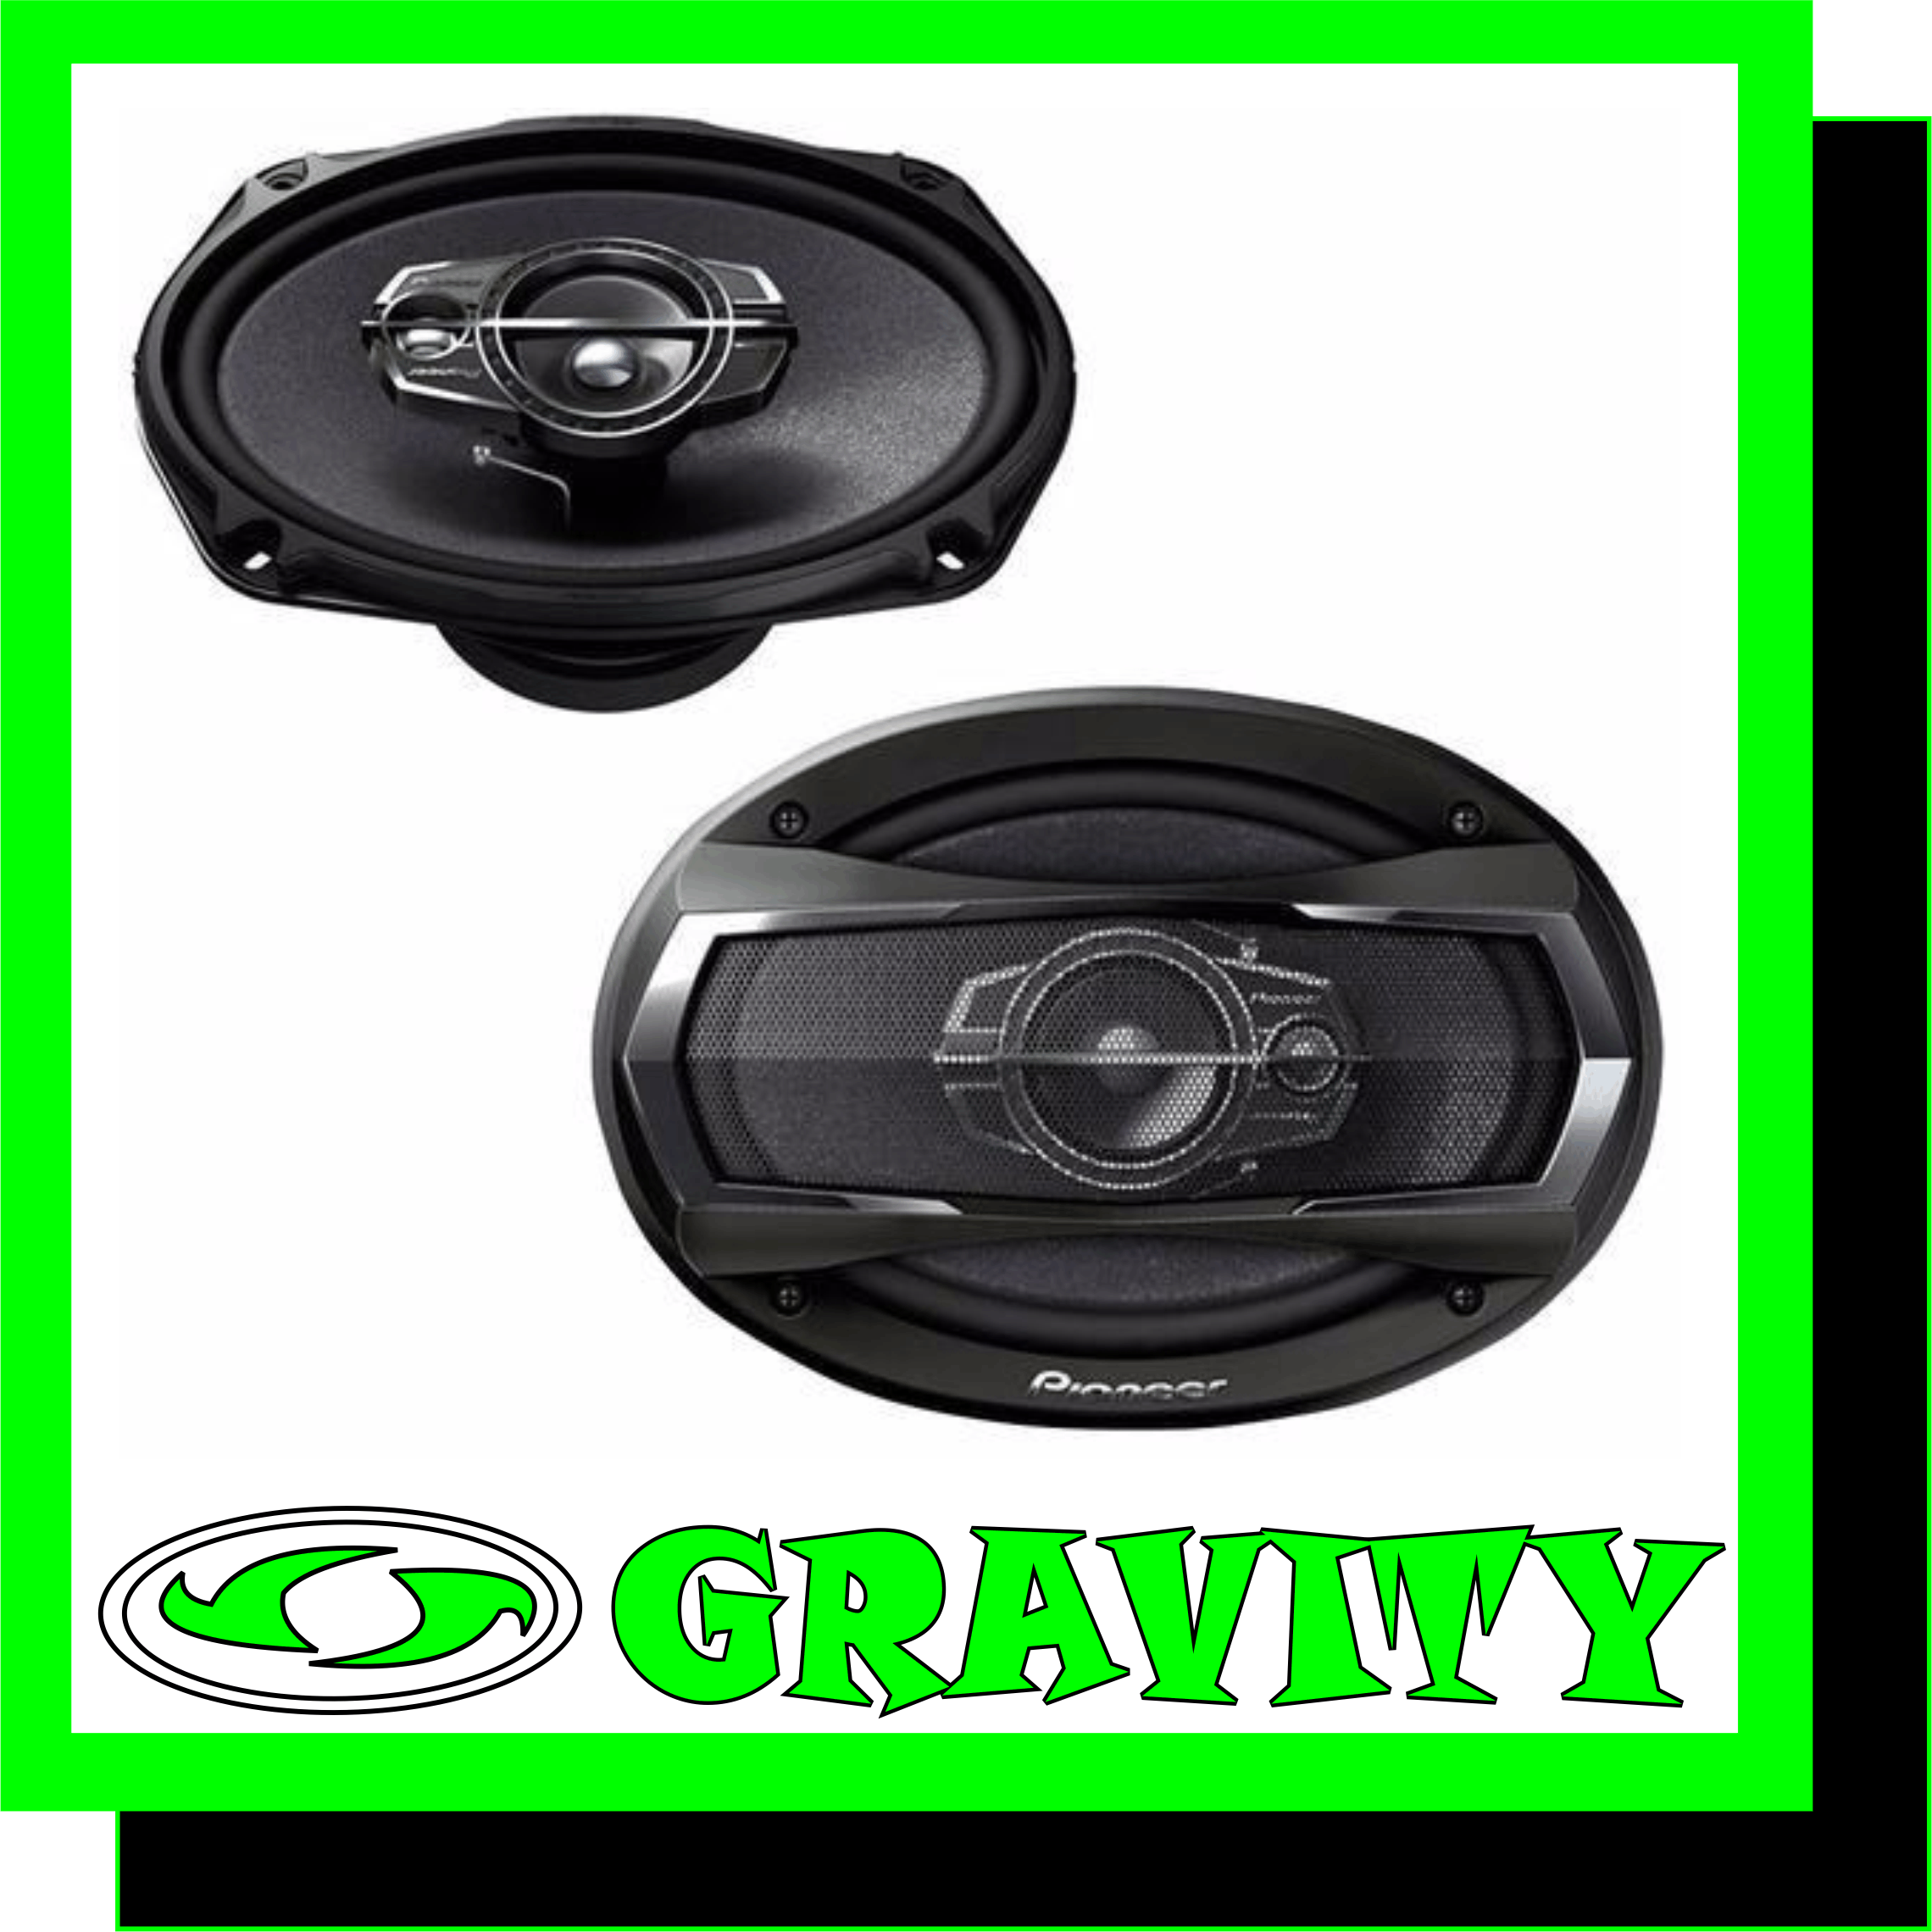 PIONEER 6X9 3-way Speaker (420W Max) -420 Watts Max Power (60 Watts Nominal) -New Multilayer Mica Matrix Cone Design -Lightweight Elastic Polymer Surround -Frequency Response - 28Hz to 36kHz -Sensitivity - 92dB -Impedance - 4? -Mounting Depth with Mount Adapter		 -Cut Out Dimensions - 153mm x 222mm